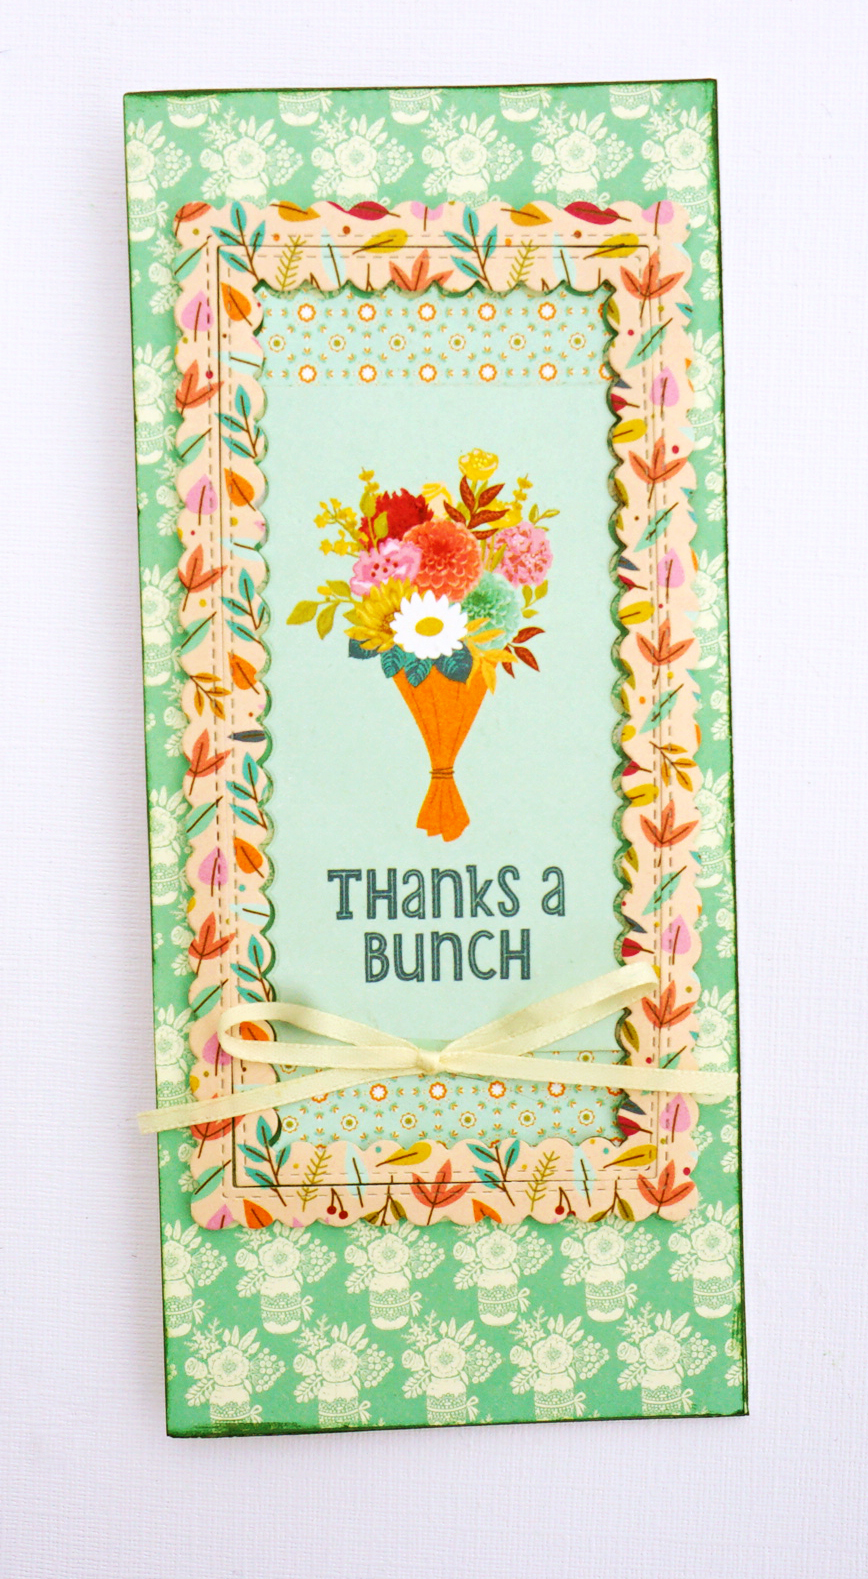 Thanks a Bunch Greeting Card Featuring Supplies From the Harvest Market Collection by Simple Stories